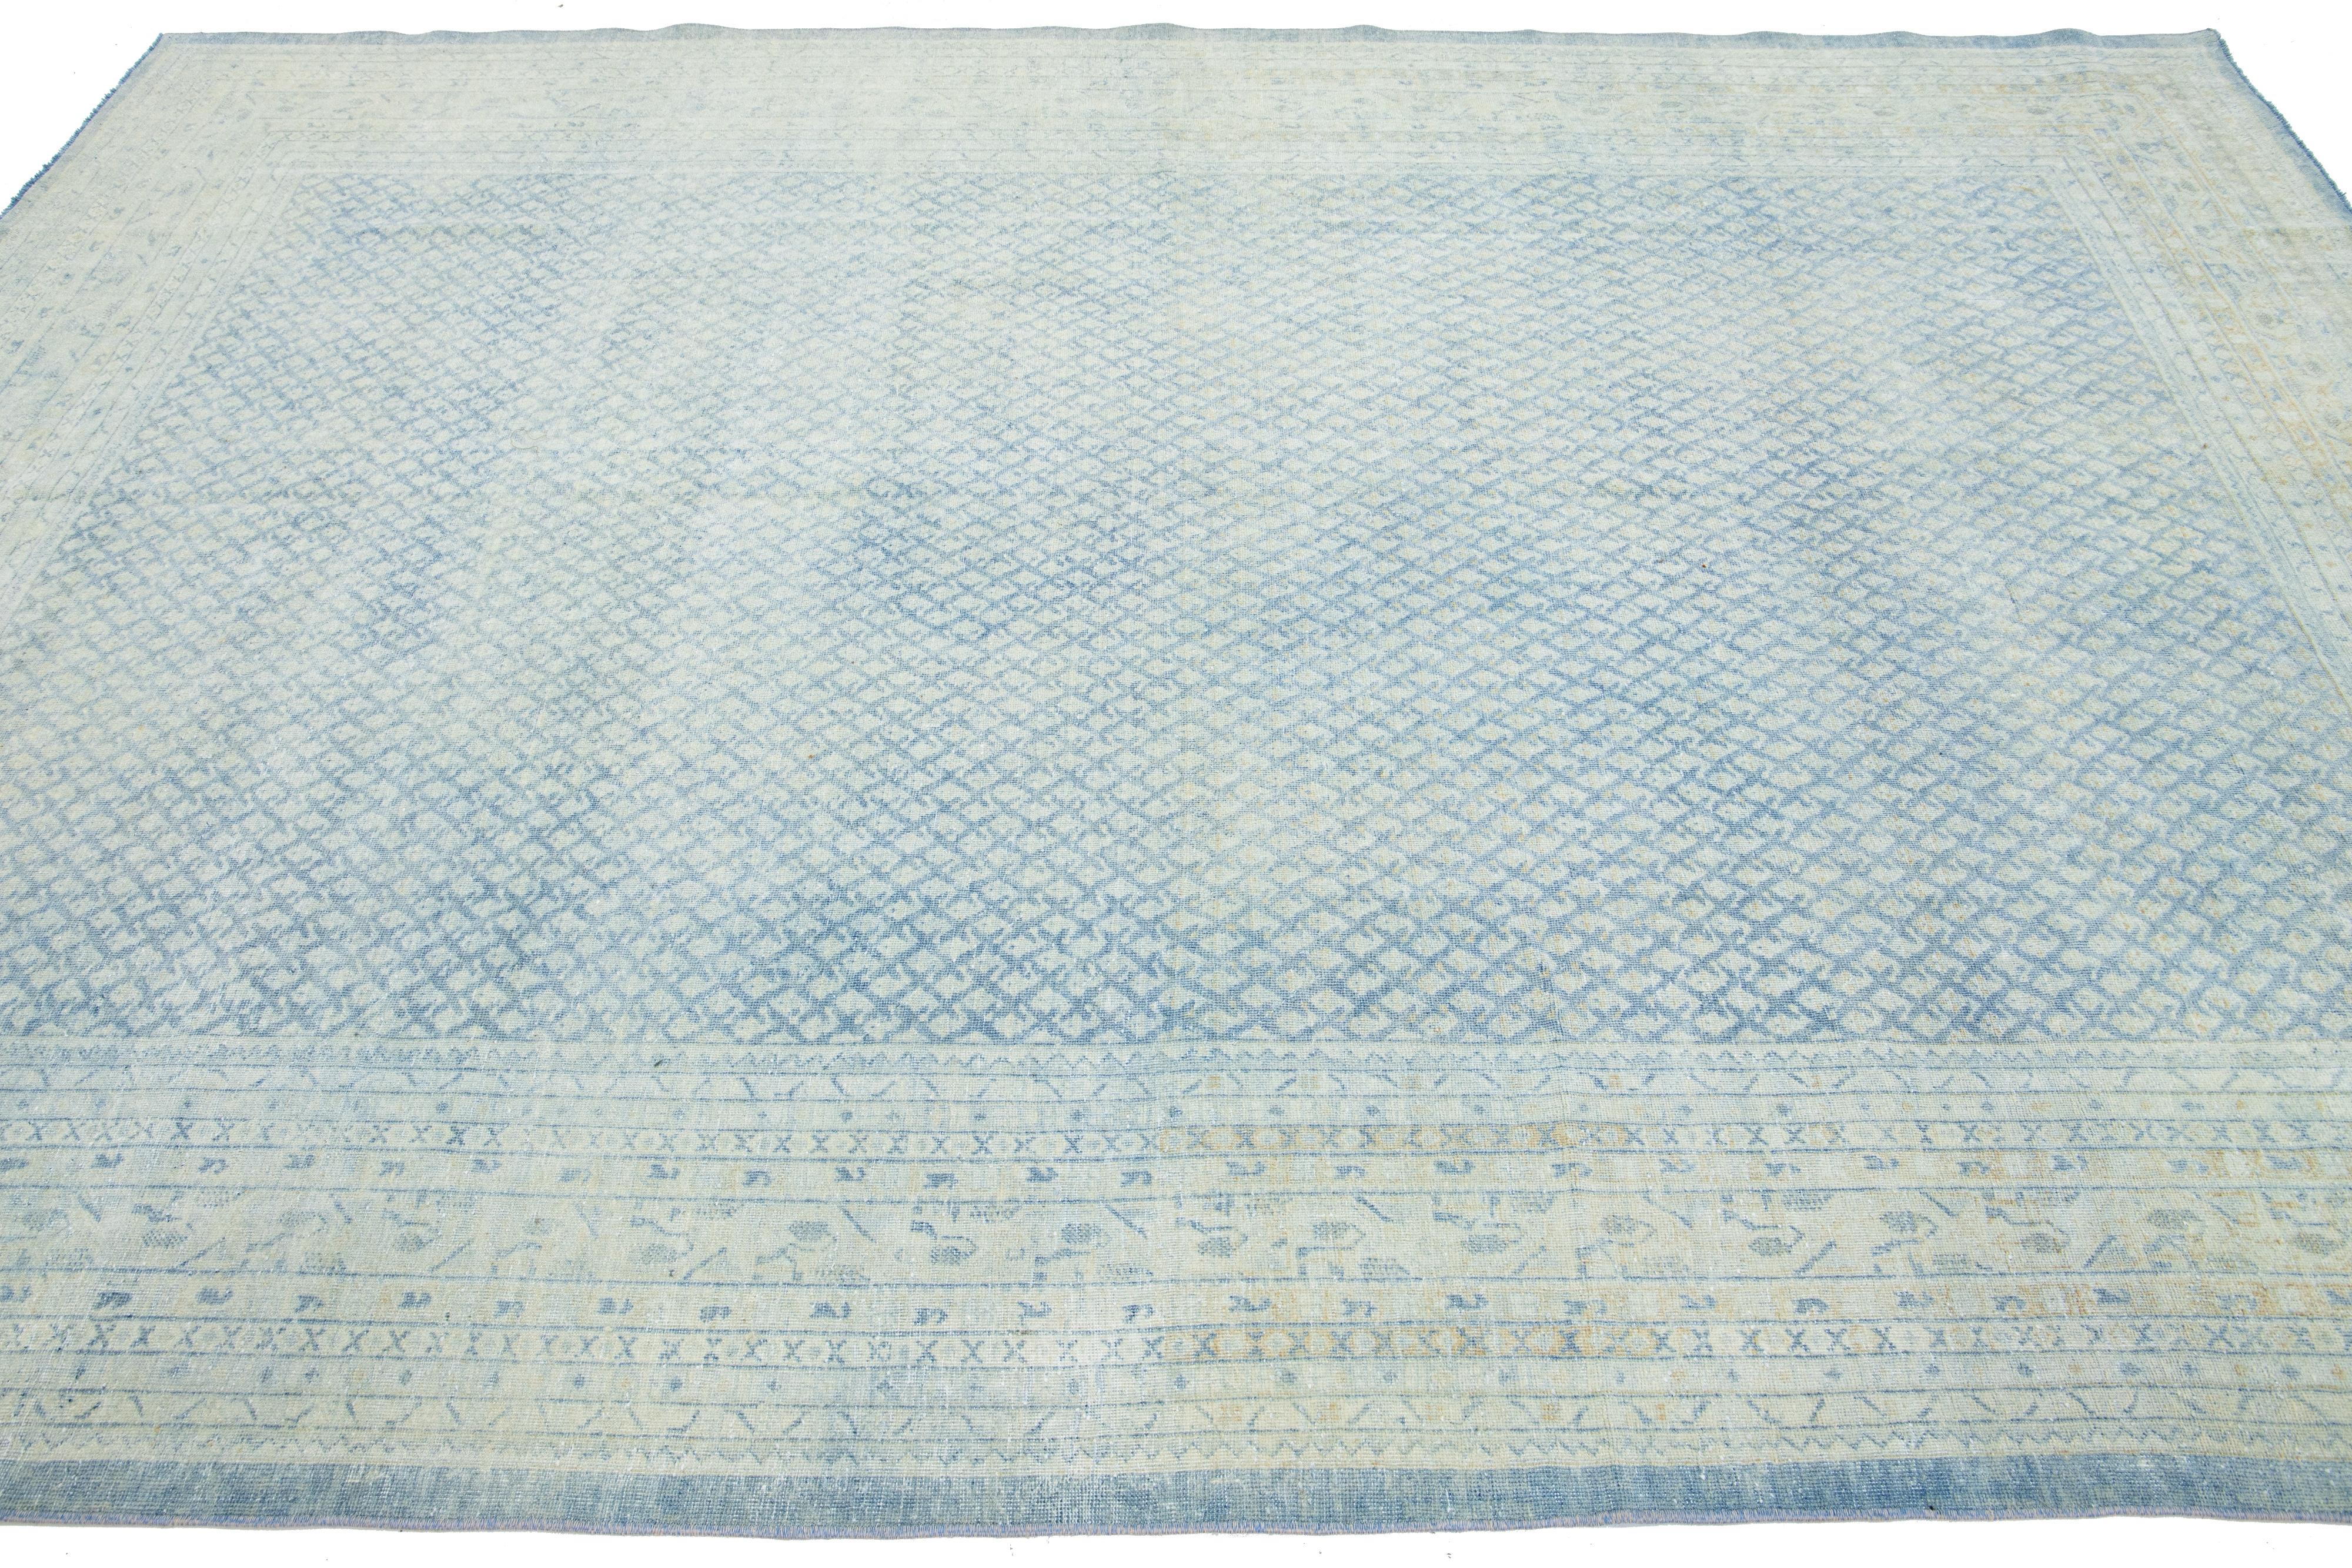 1920s Allover Blue Antique Persian Tabriz Wool Rug  In Good Condition For Sale In Norwalk, CT